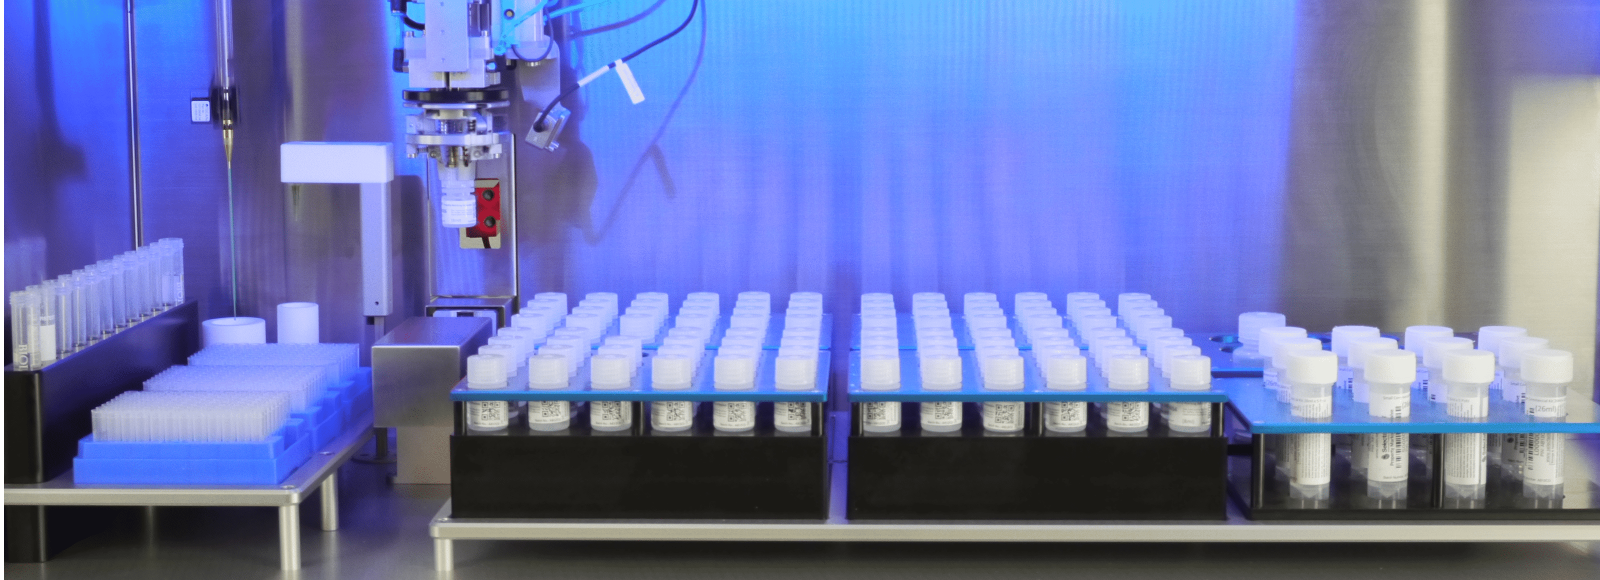 A close-up of the X-TubeProcessor sterile version by HTI bio-X